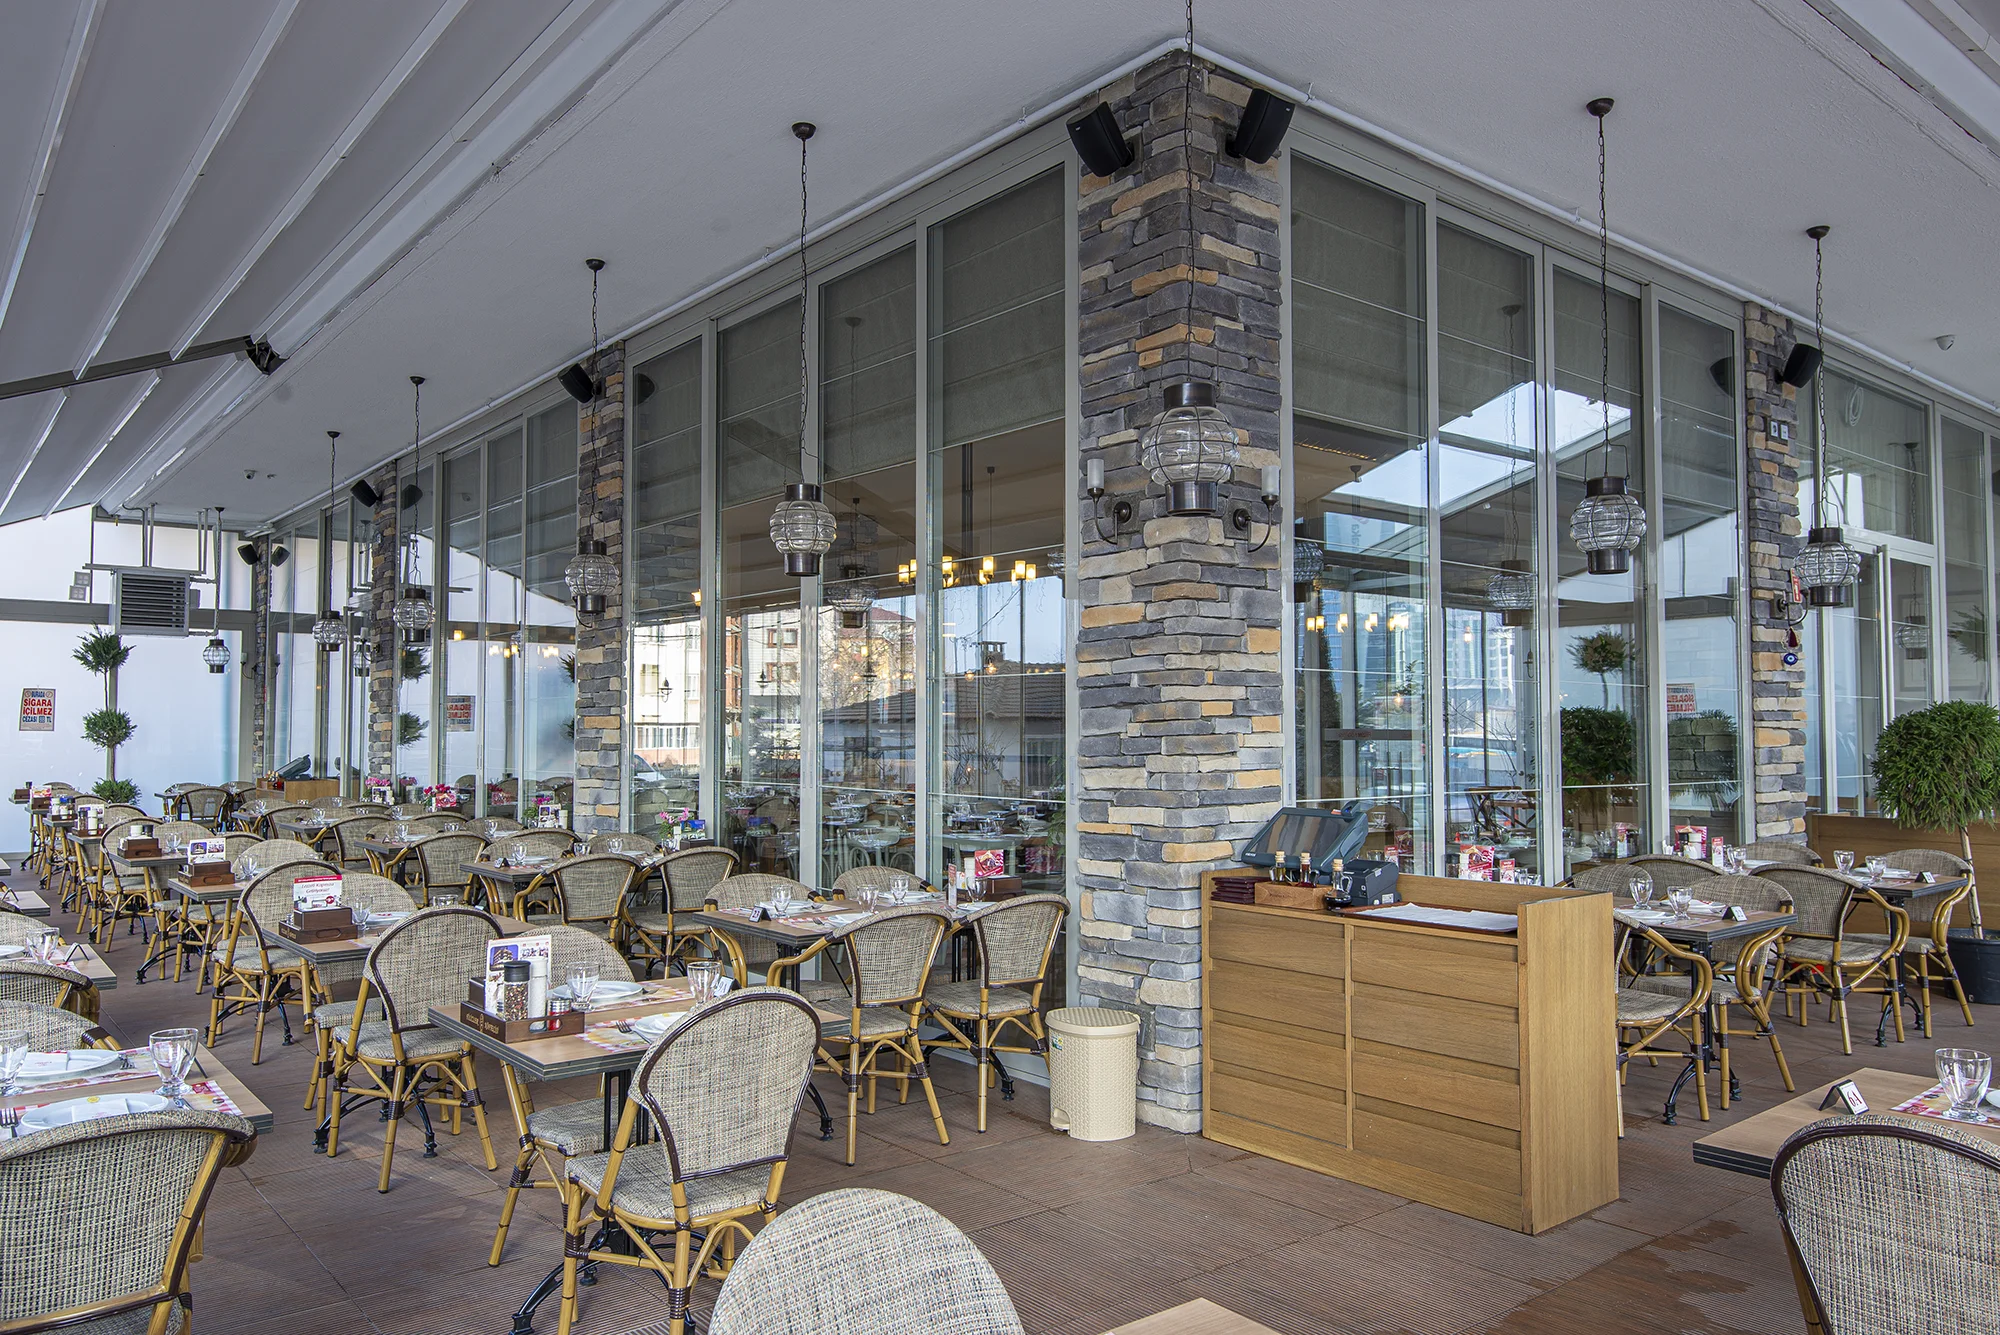 Rustic restaurant saloon with stone walls